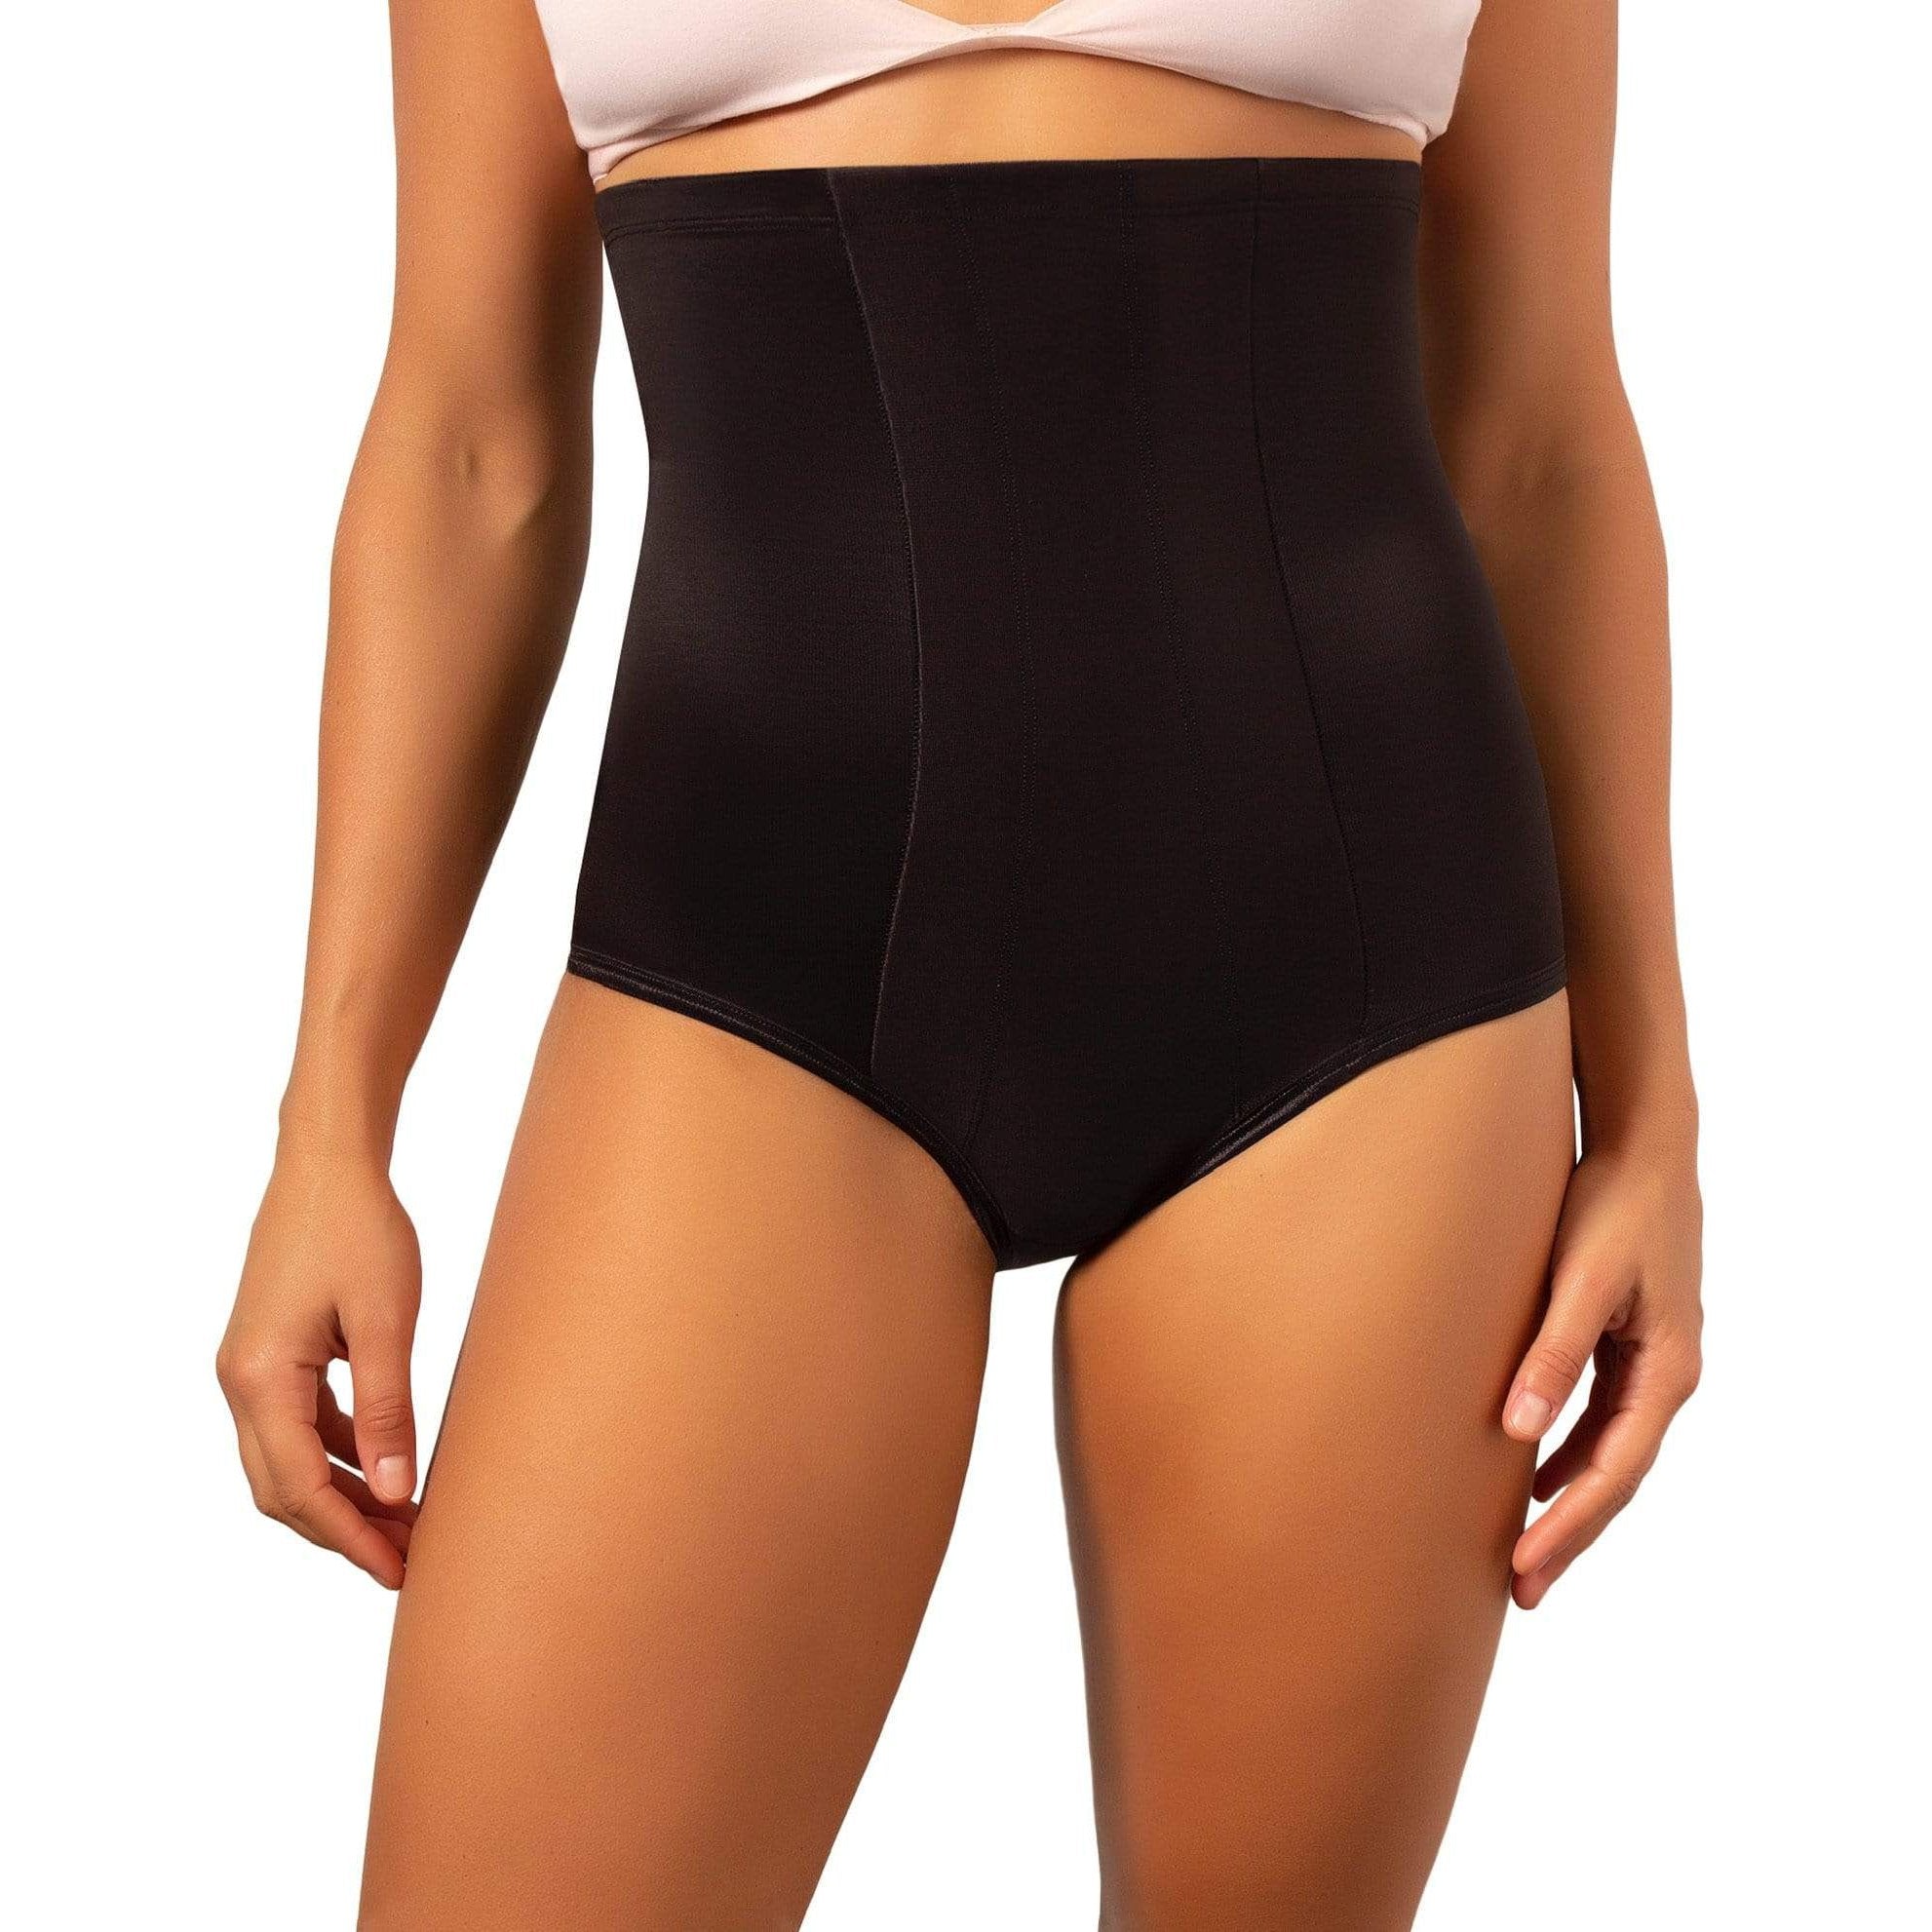 Miraclesuit Shapewear Hi Waist Brief from Illusions Lingerie in Melbourne